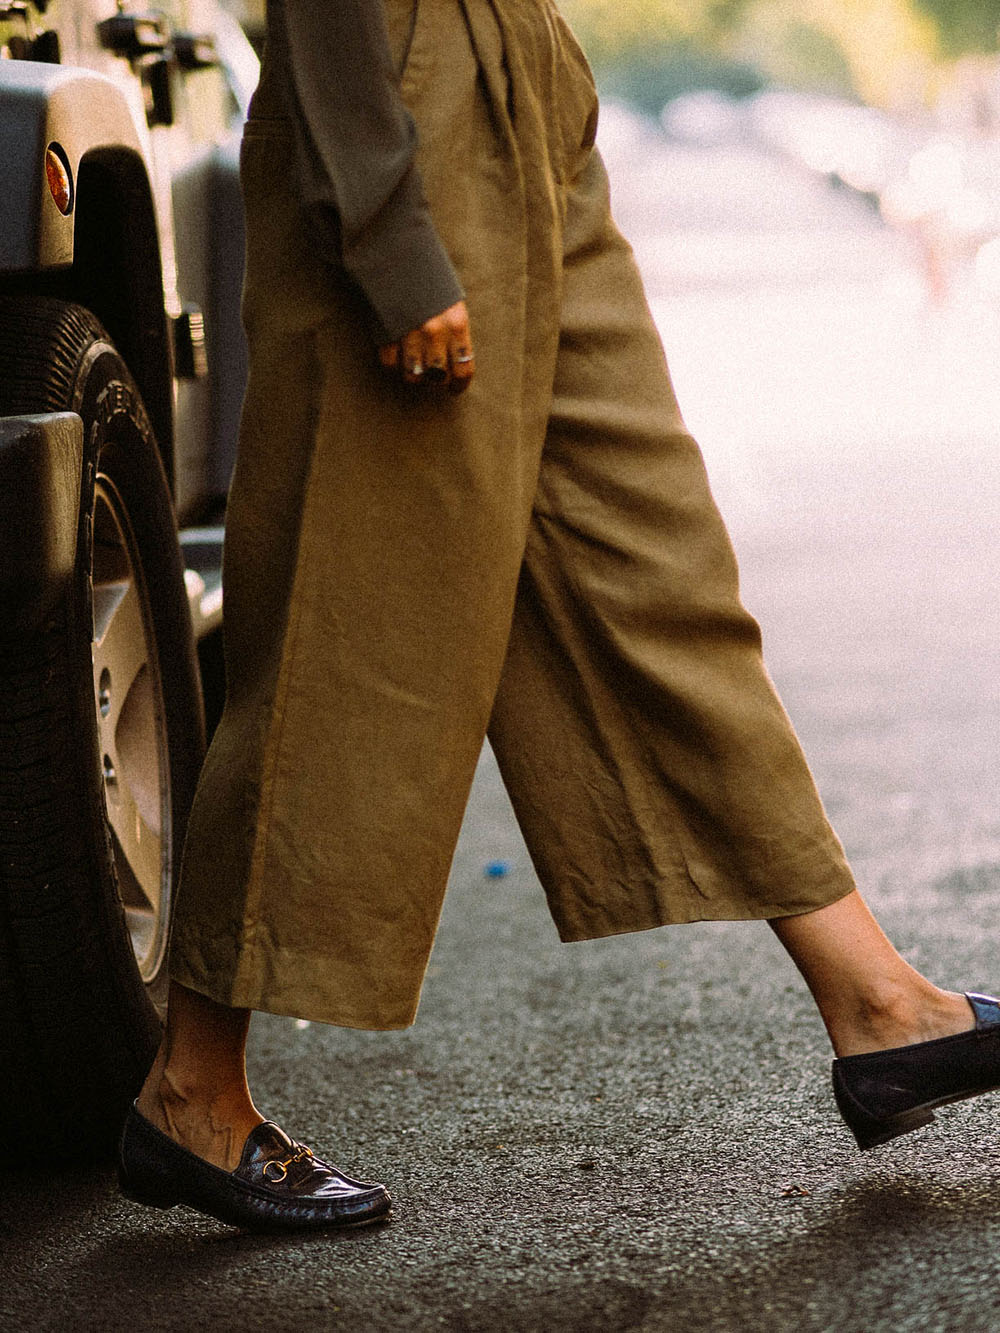 90s Safari Vogue style by Charlotte Groeneveld from Thefashionguitar